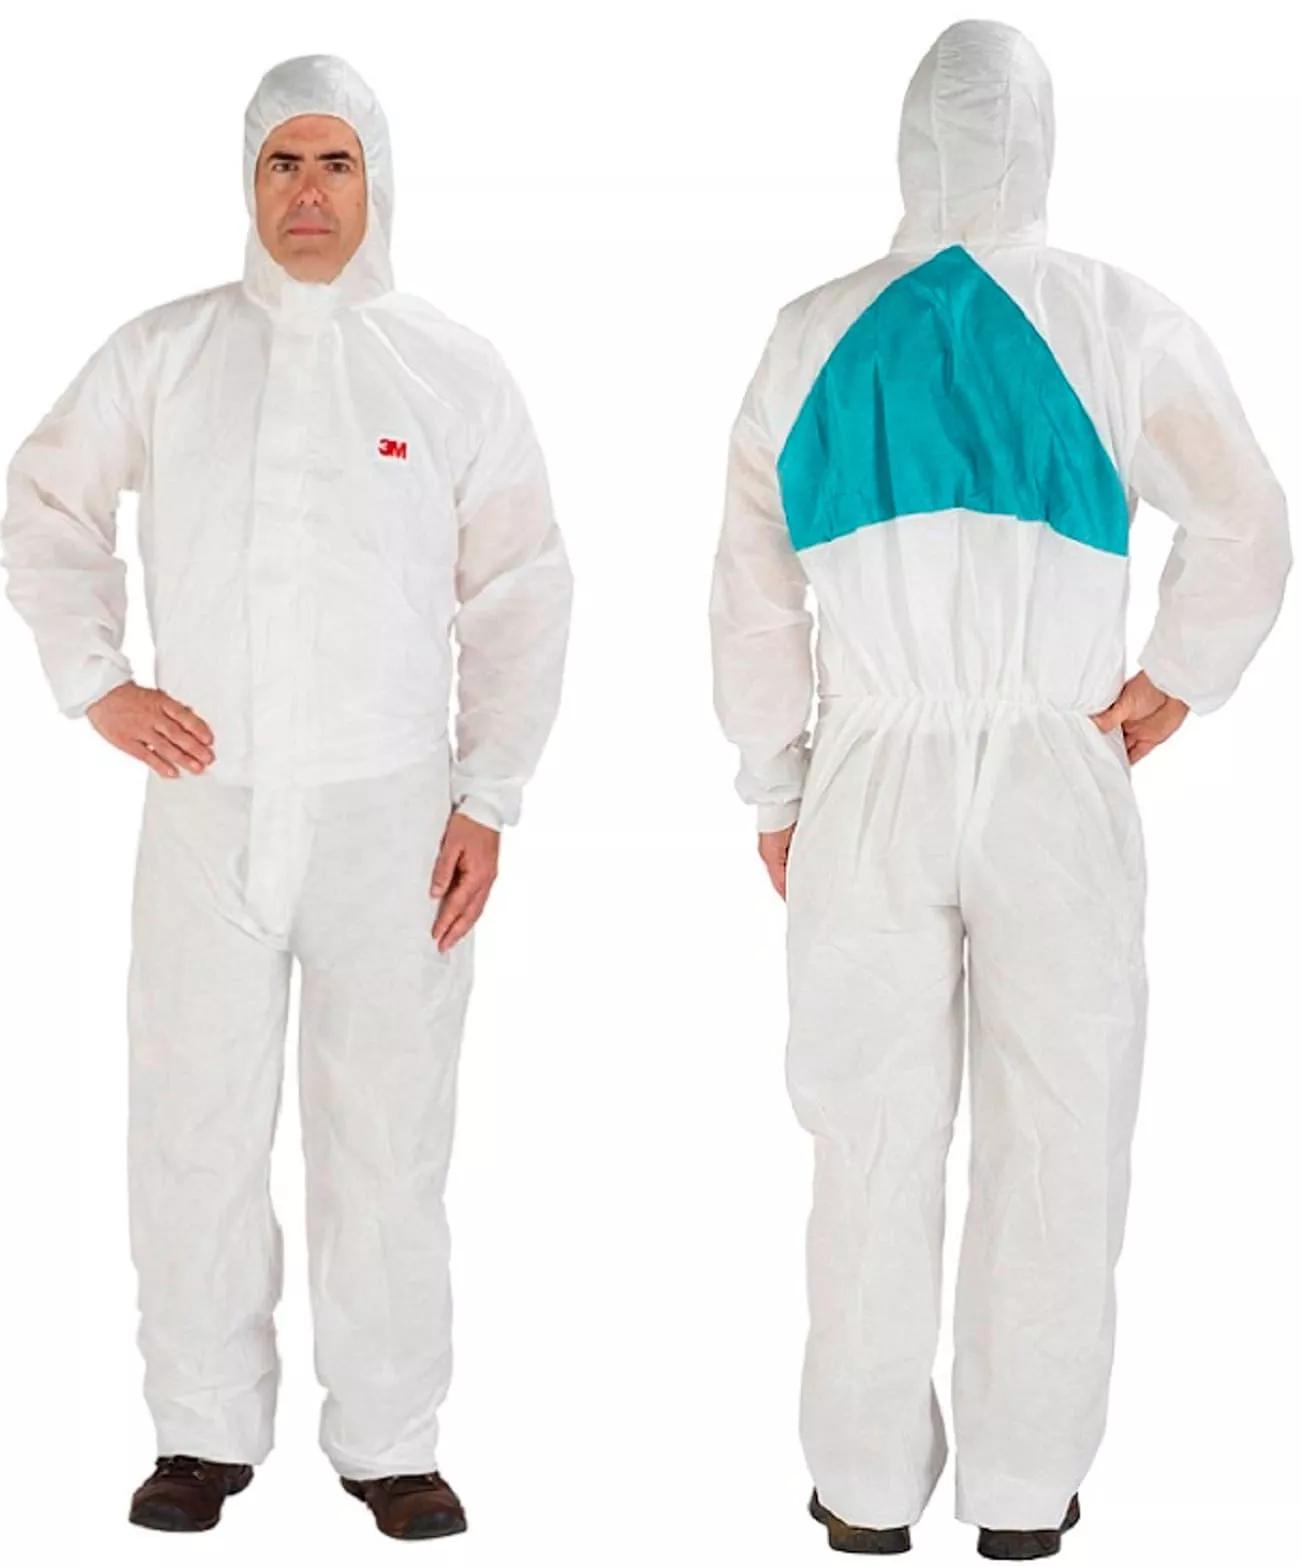 3M™ Disposable Protective Coverall 4520-XXL, White/Green, Type 5/6, 20
ea/Case